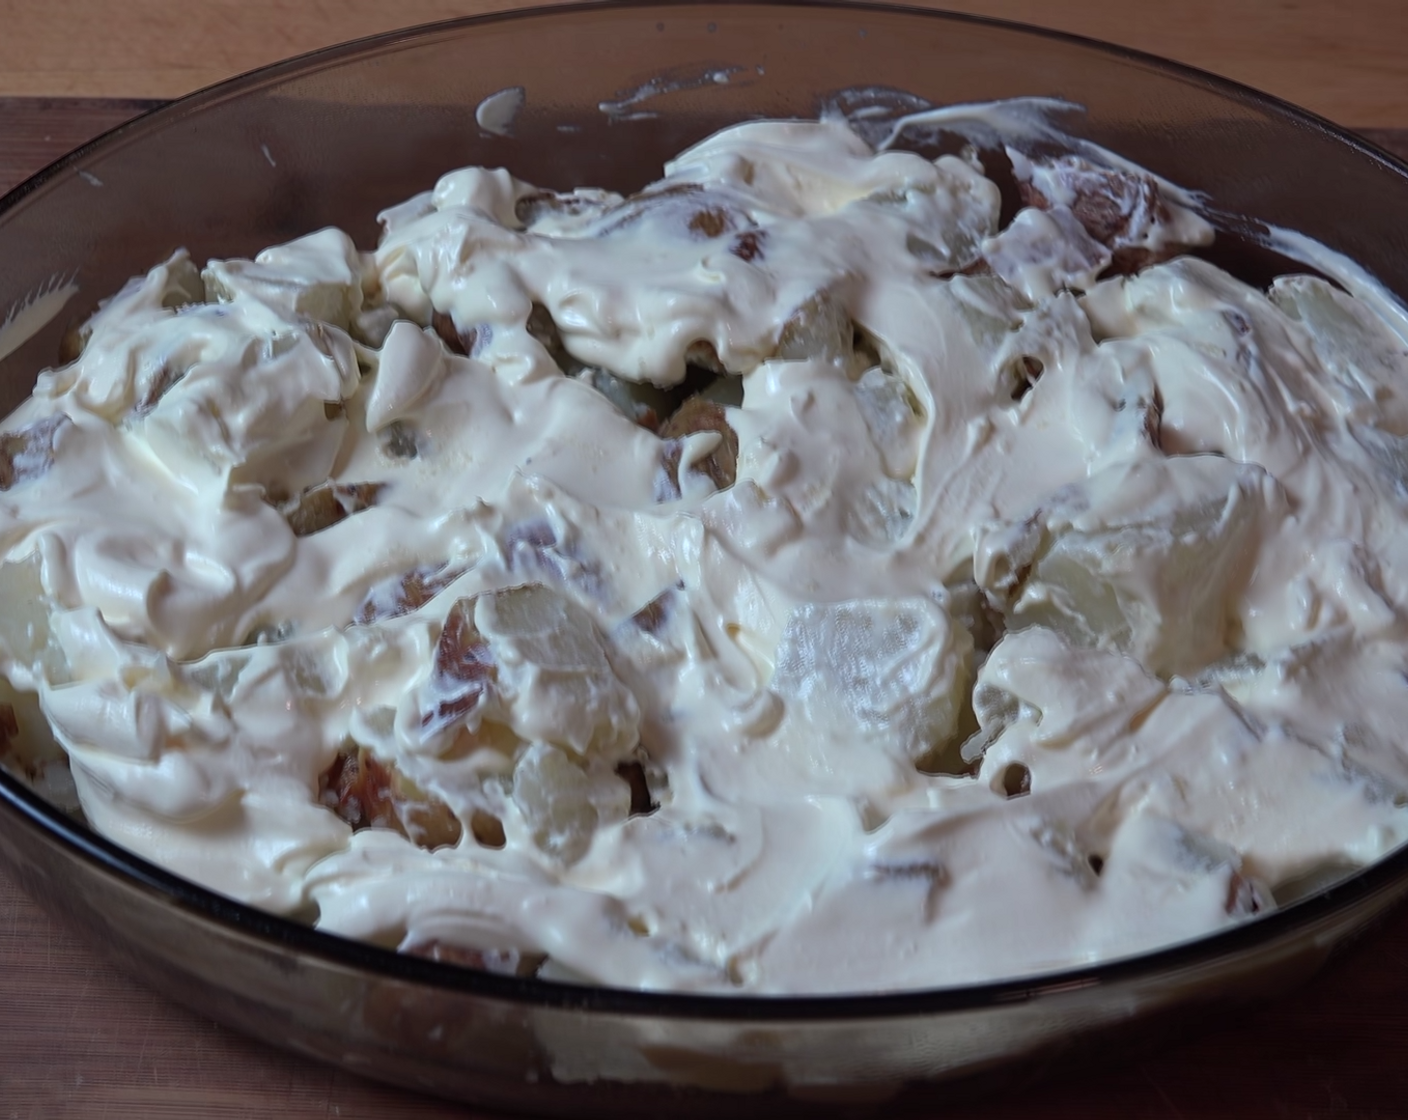 step 9 Assemble your Baked Potato Casserole. Lightly grease a large oven-proof baking dish with Nonstick Cooking Spray (as needed). Lay in 1/2 of the chopped-up potatoes, dollop over, and spread Sour Cream (1 1/4 cups).